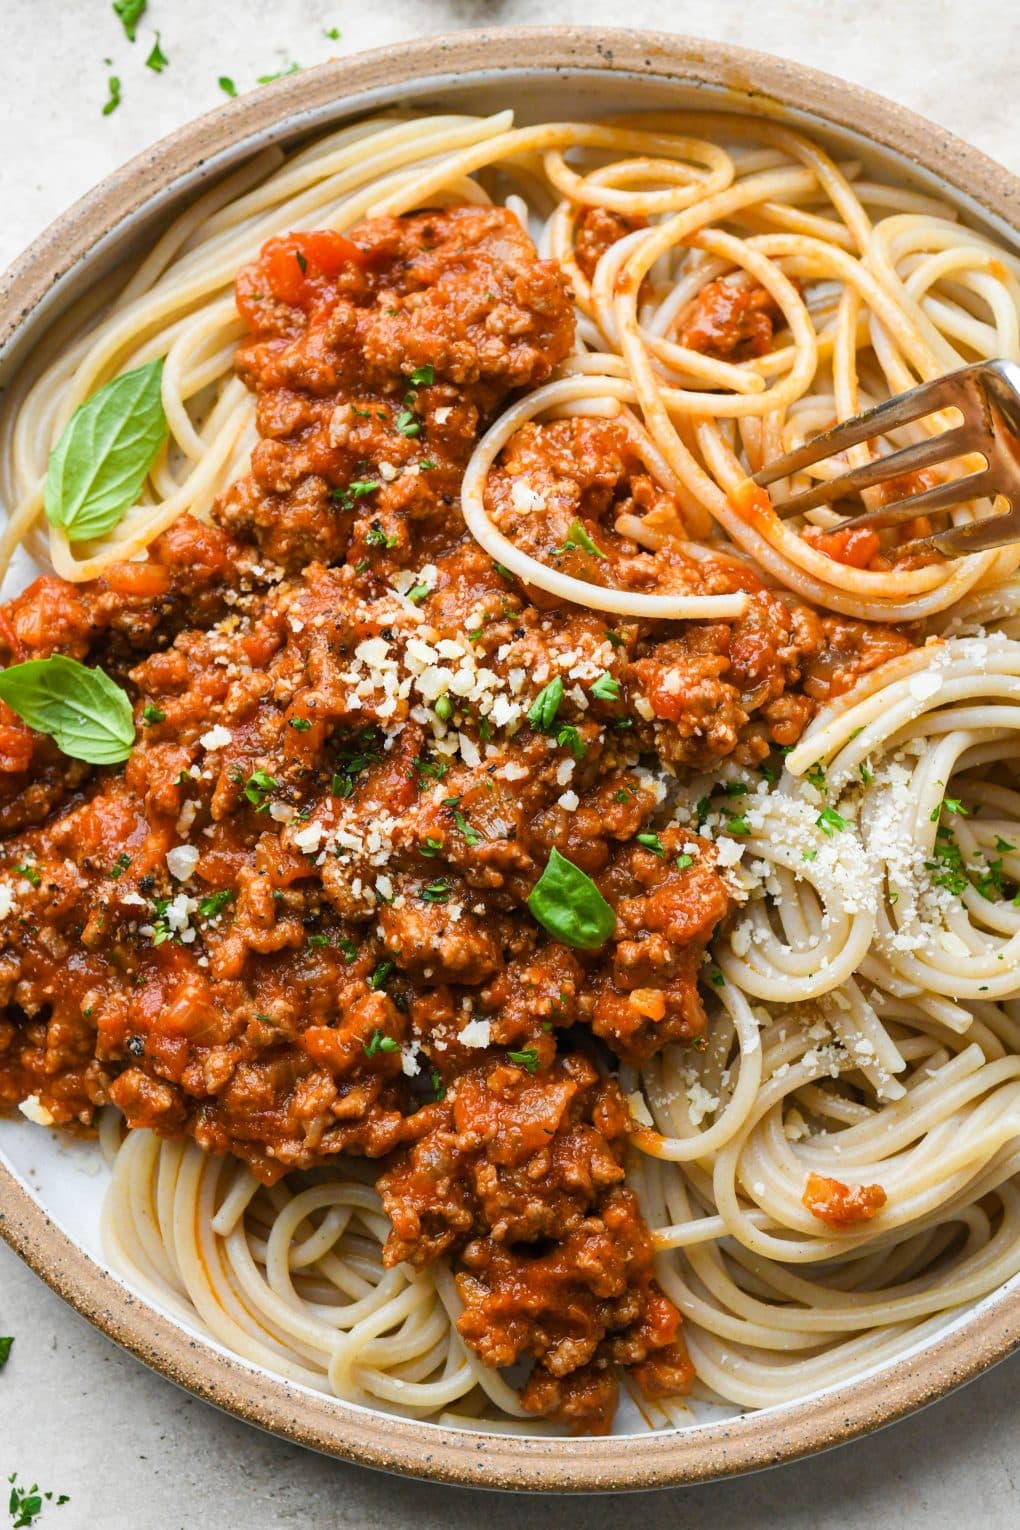 A rustic ceramic plate of twirled spaghetti topped with homemade marinara sauce with ground beef, with a fork twirling some of the noodles.